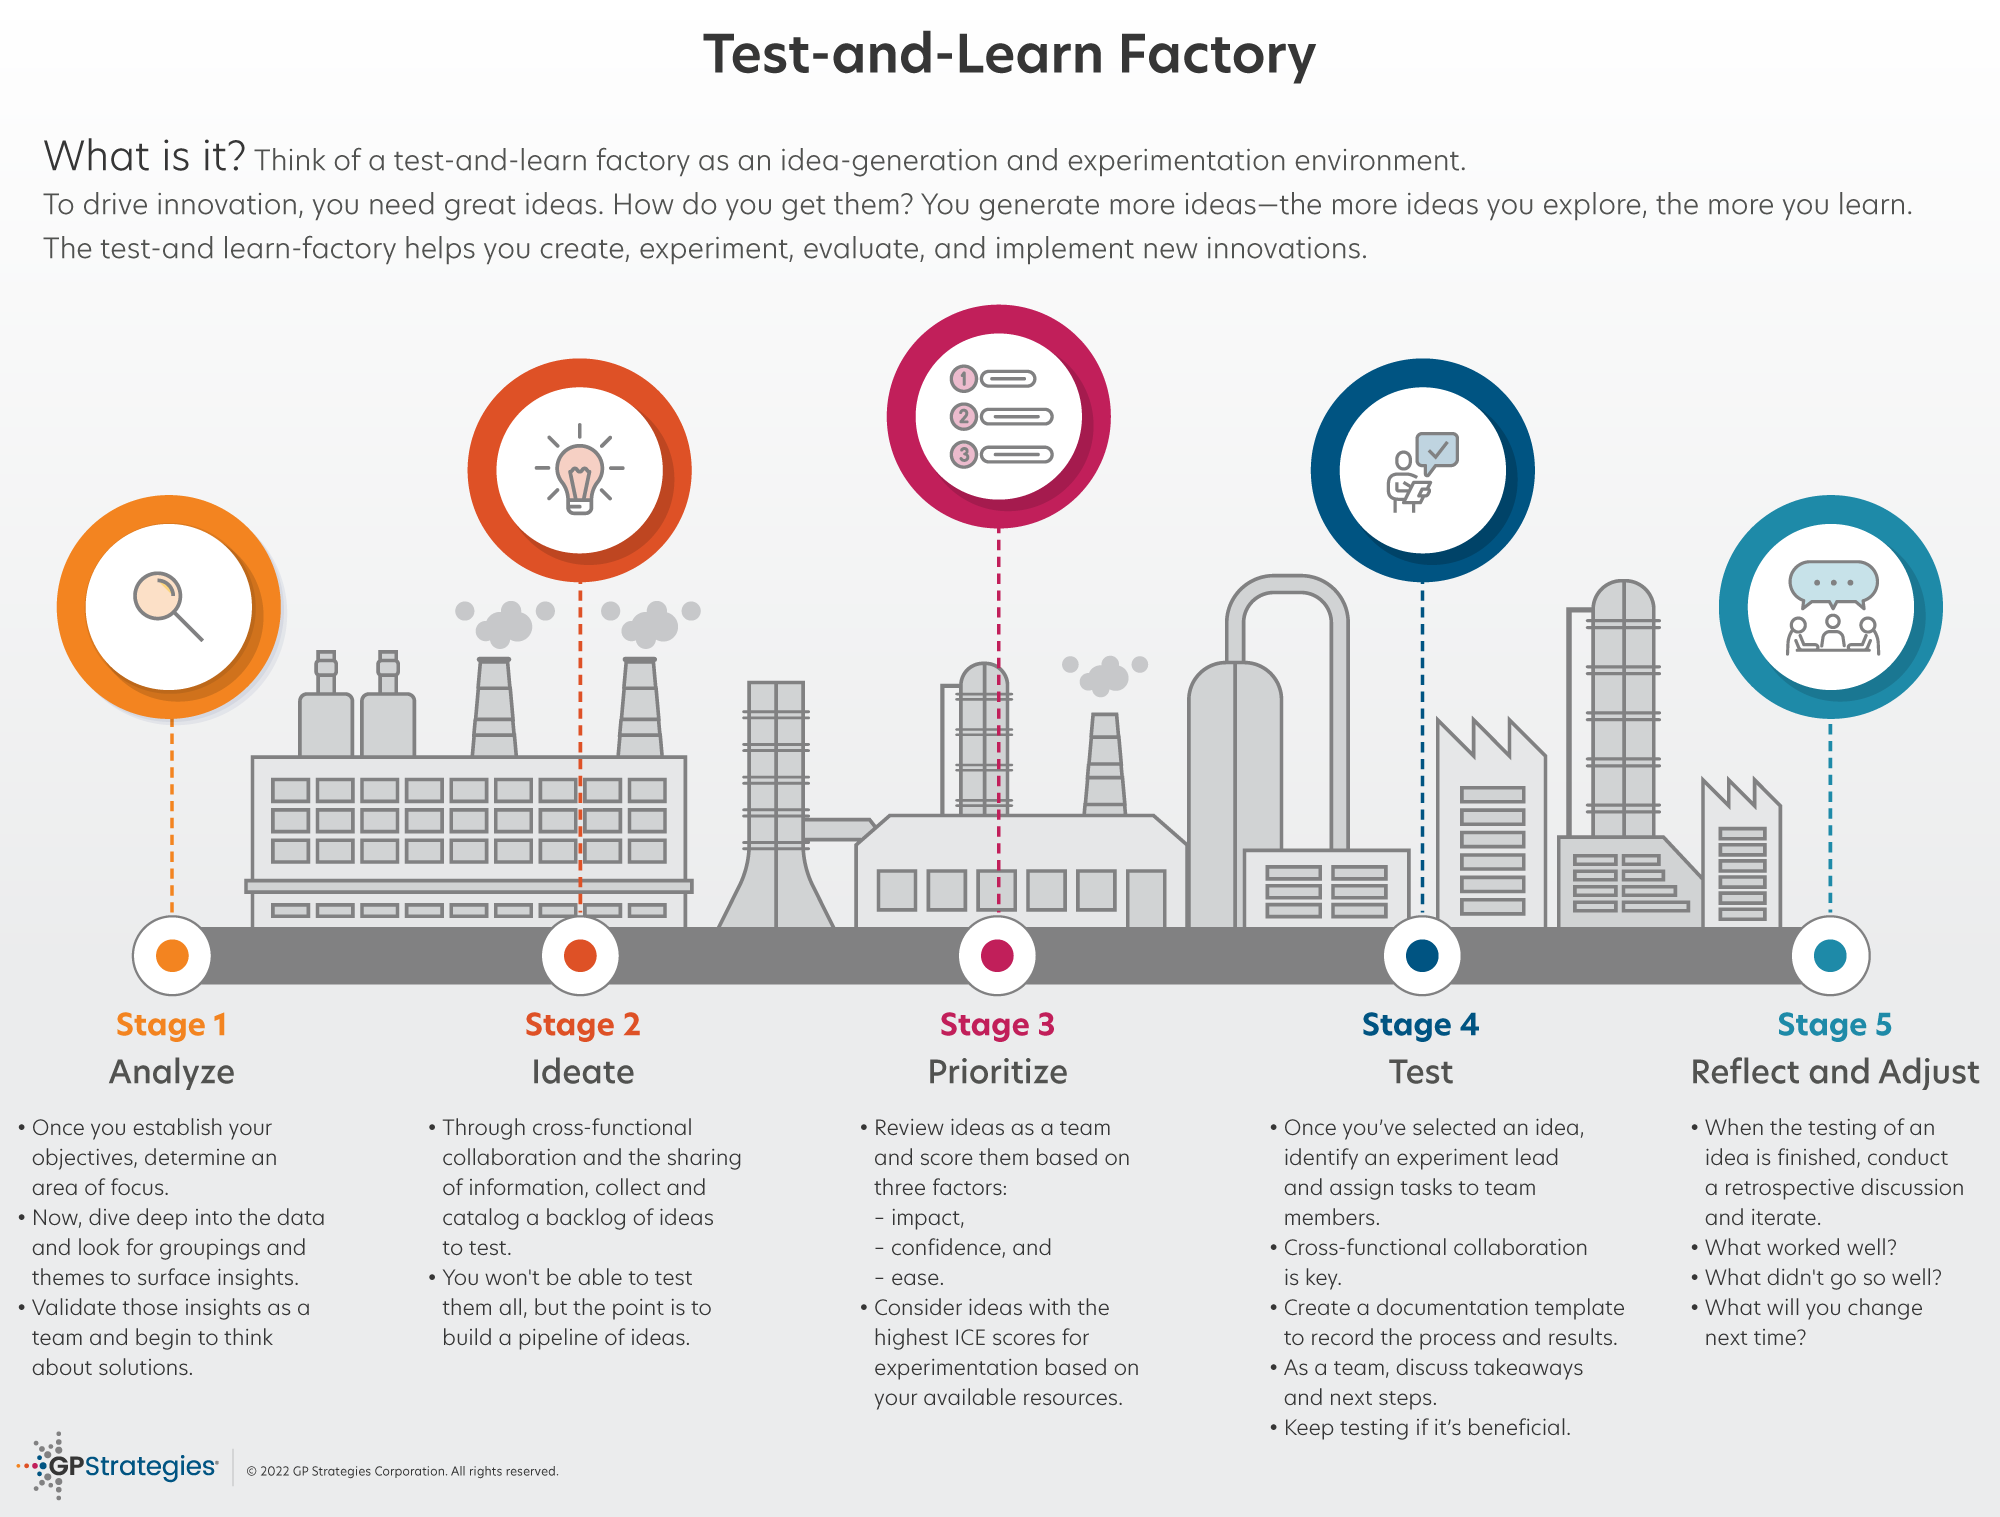 The test-and-learn factory is a framework for innovation